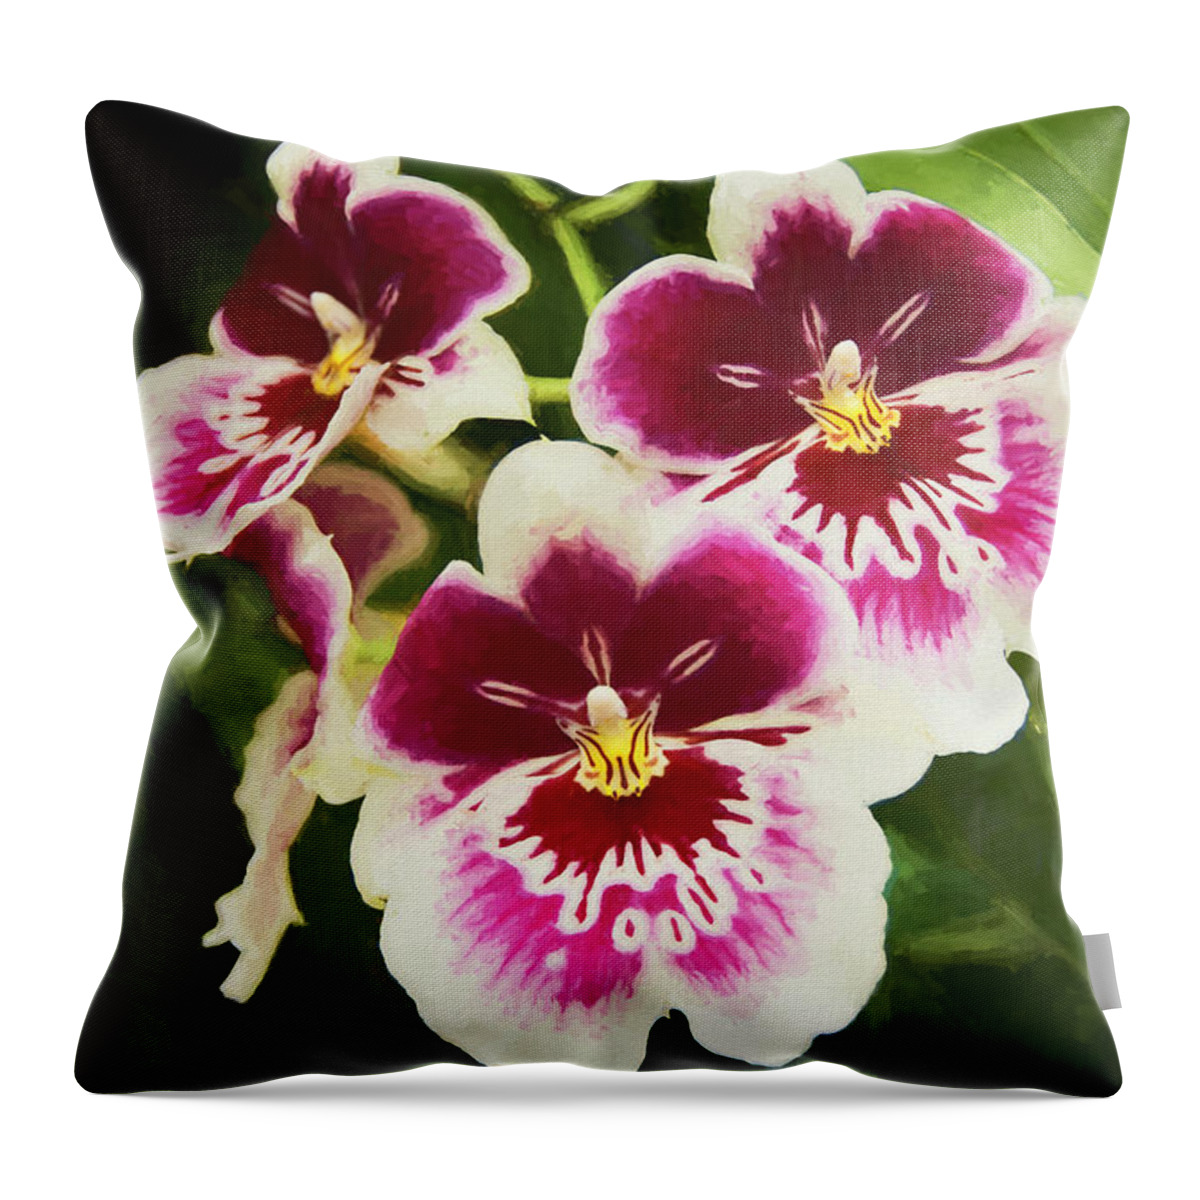 Atalnta Botanical Gardens Throw Pillow featuring the photograph Wine Orchids- The Risen Lord by Penny Lisowski